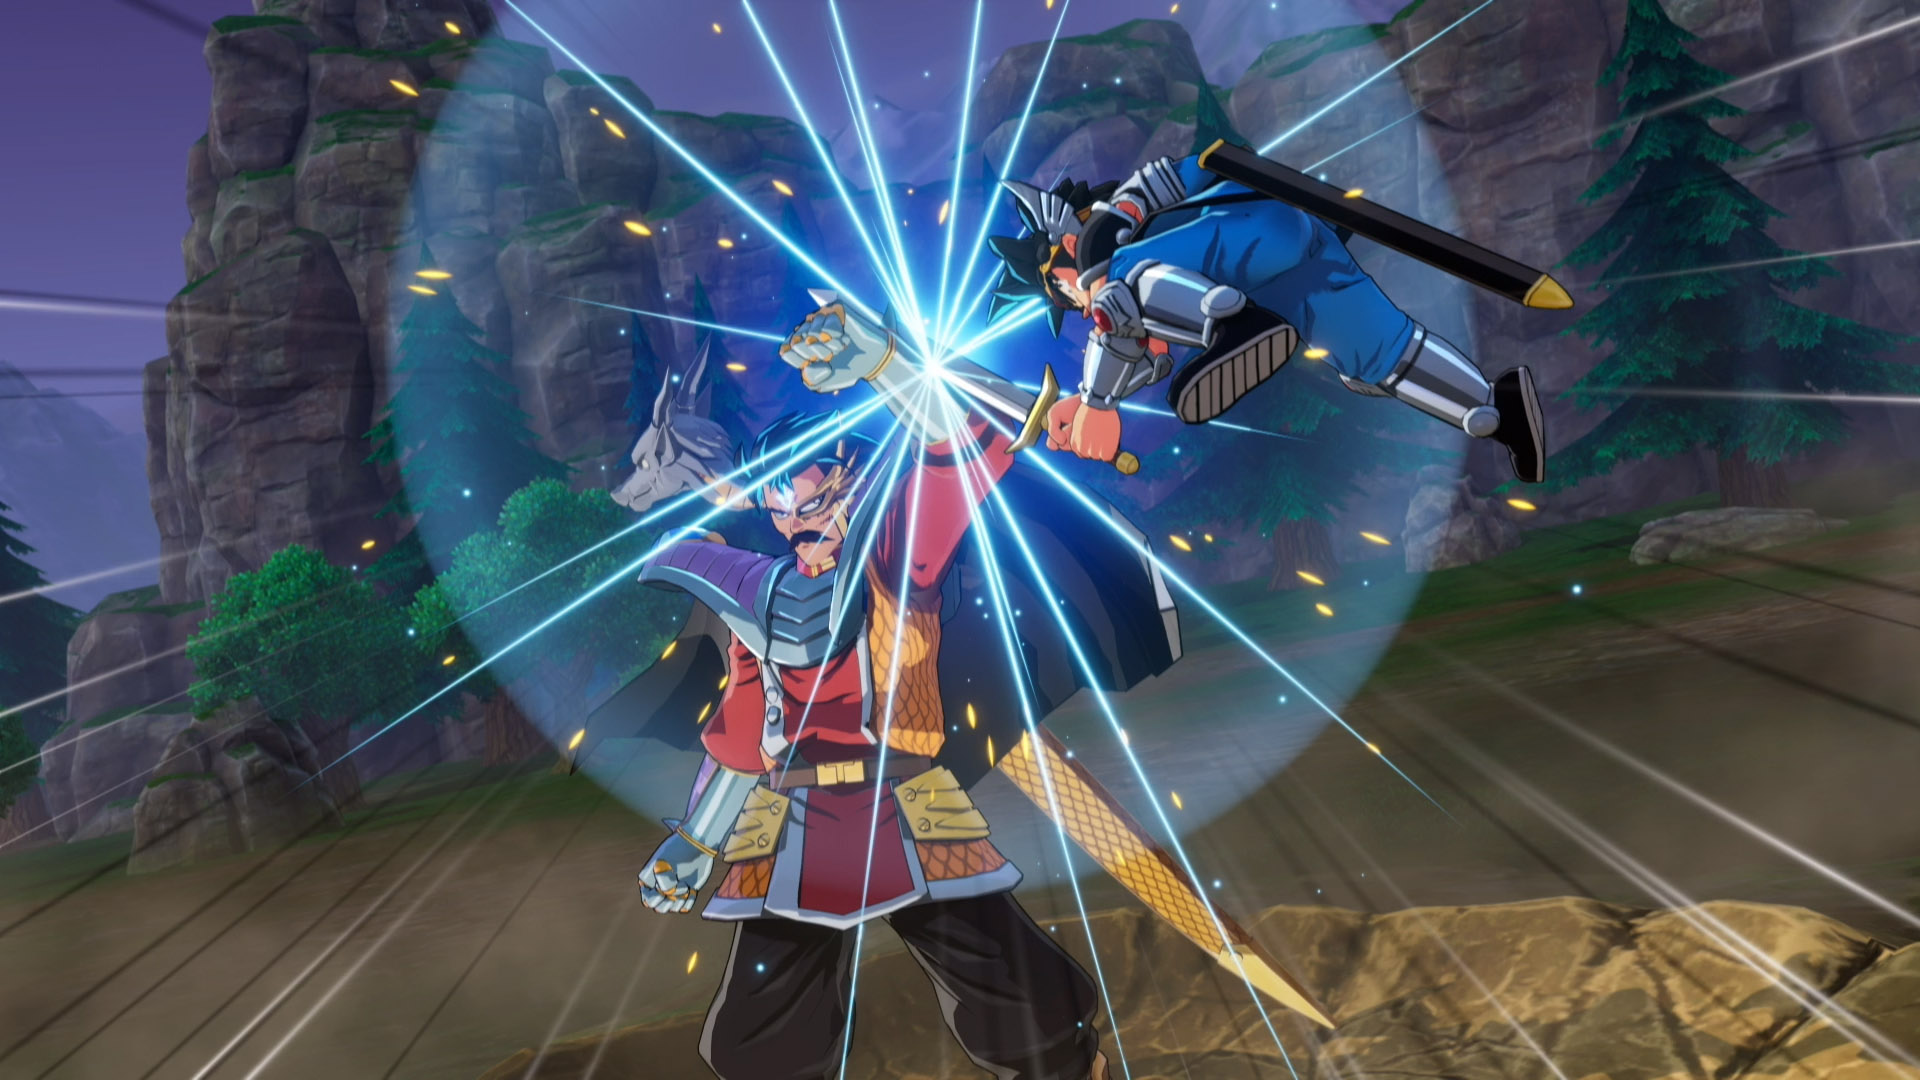 Dragon Quest: The Adventure of Dai Anime Premieres in Japan on October 3rd